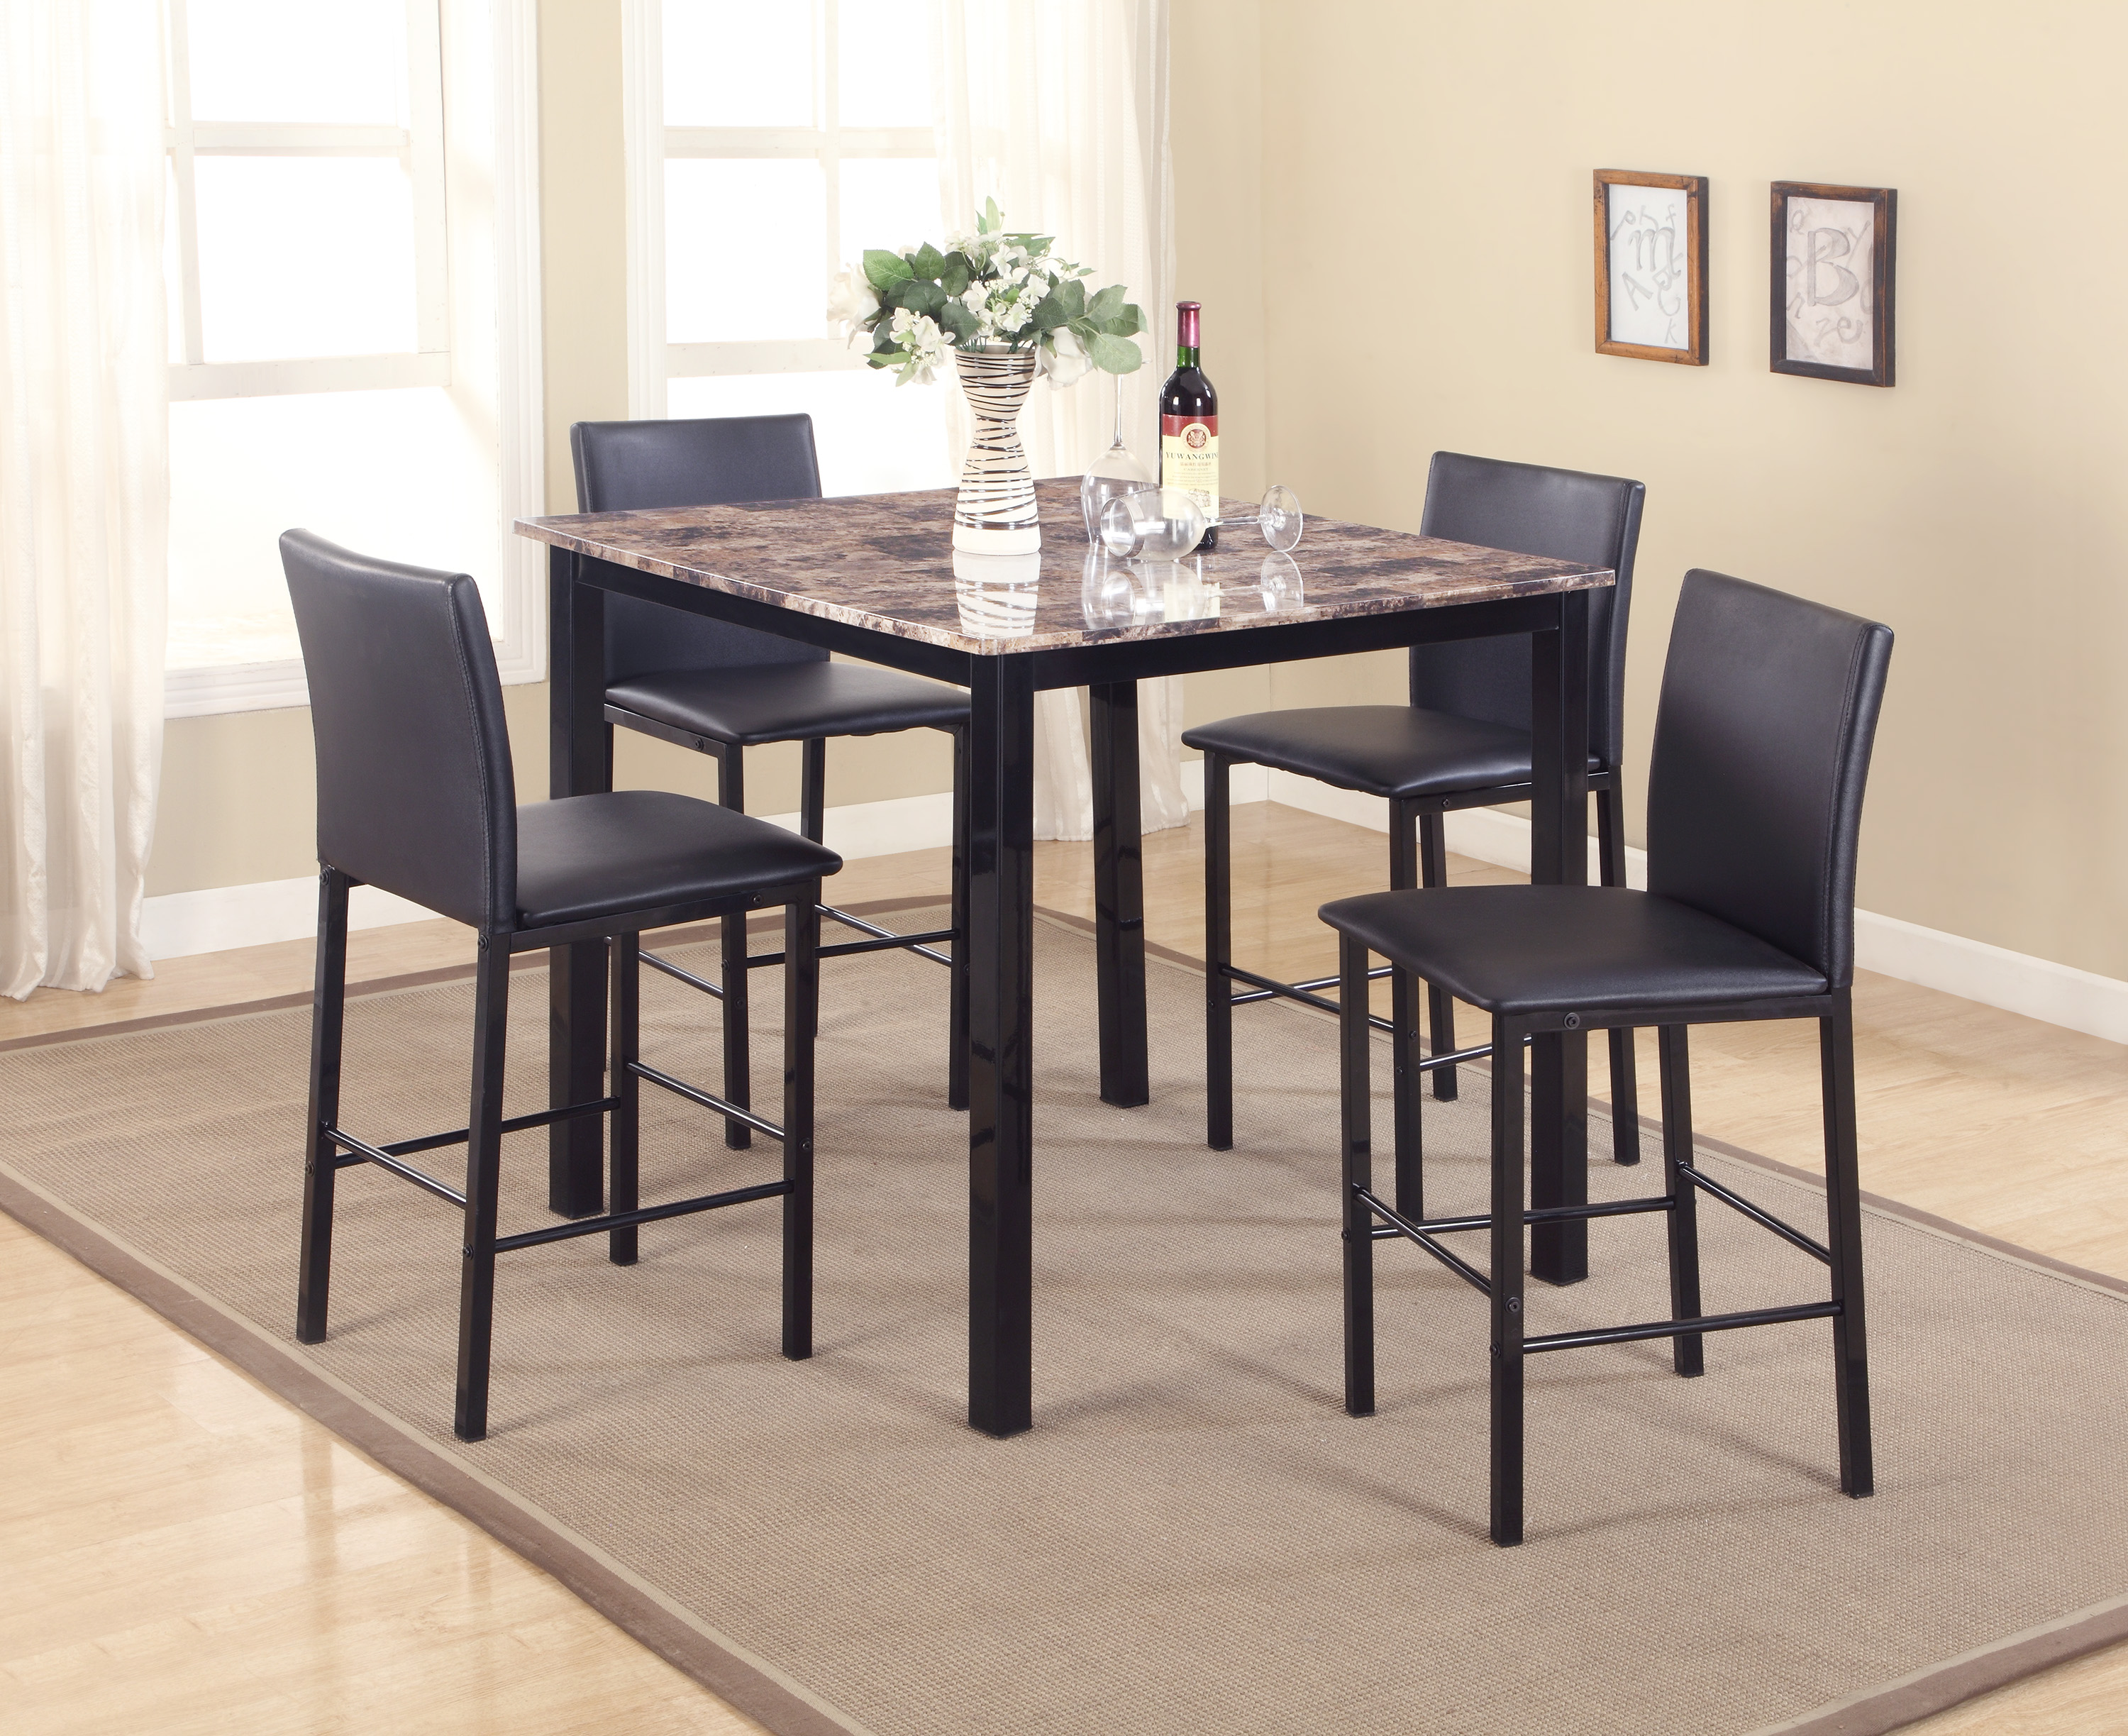 1817 AIDEN 5PC COUNTER HEIGHT DINING SET